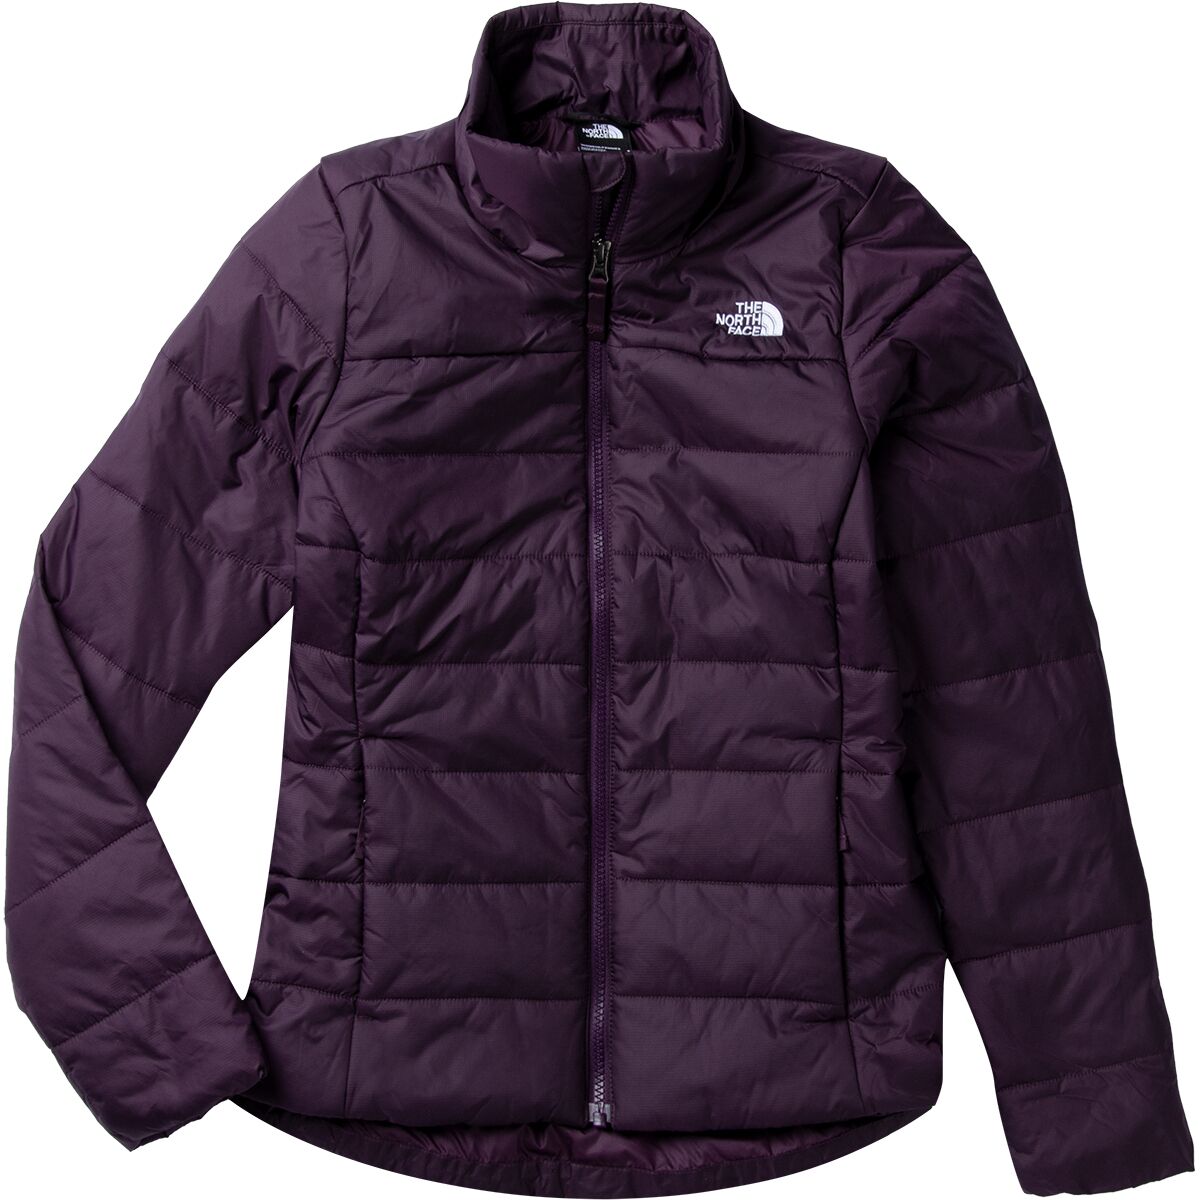 The North Face Flare Jacket - Women's - Clothing